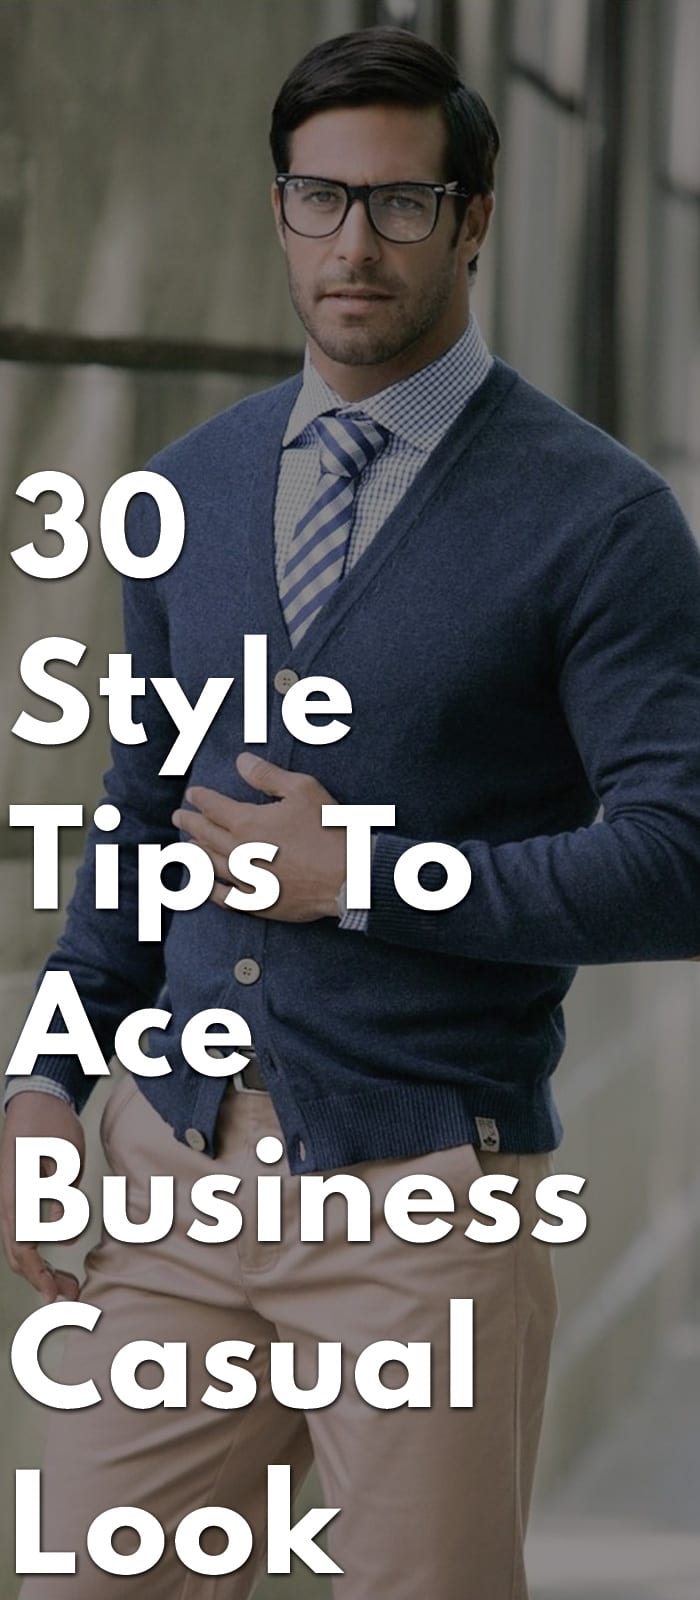 30-Style-Tips-To-Ace-Business-Casual-Look-.